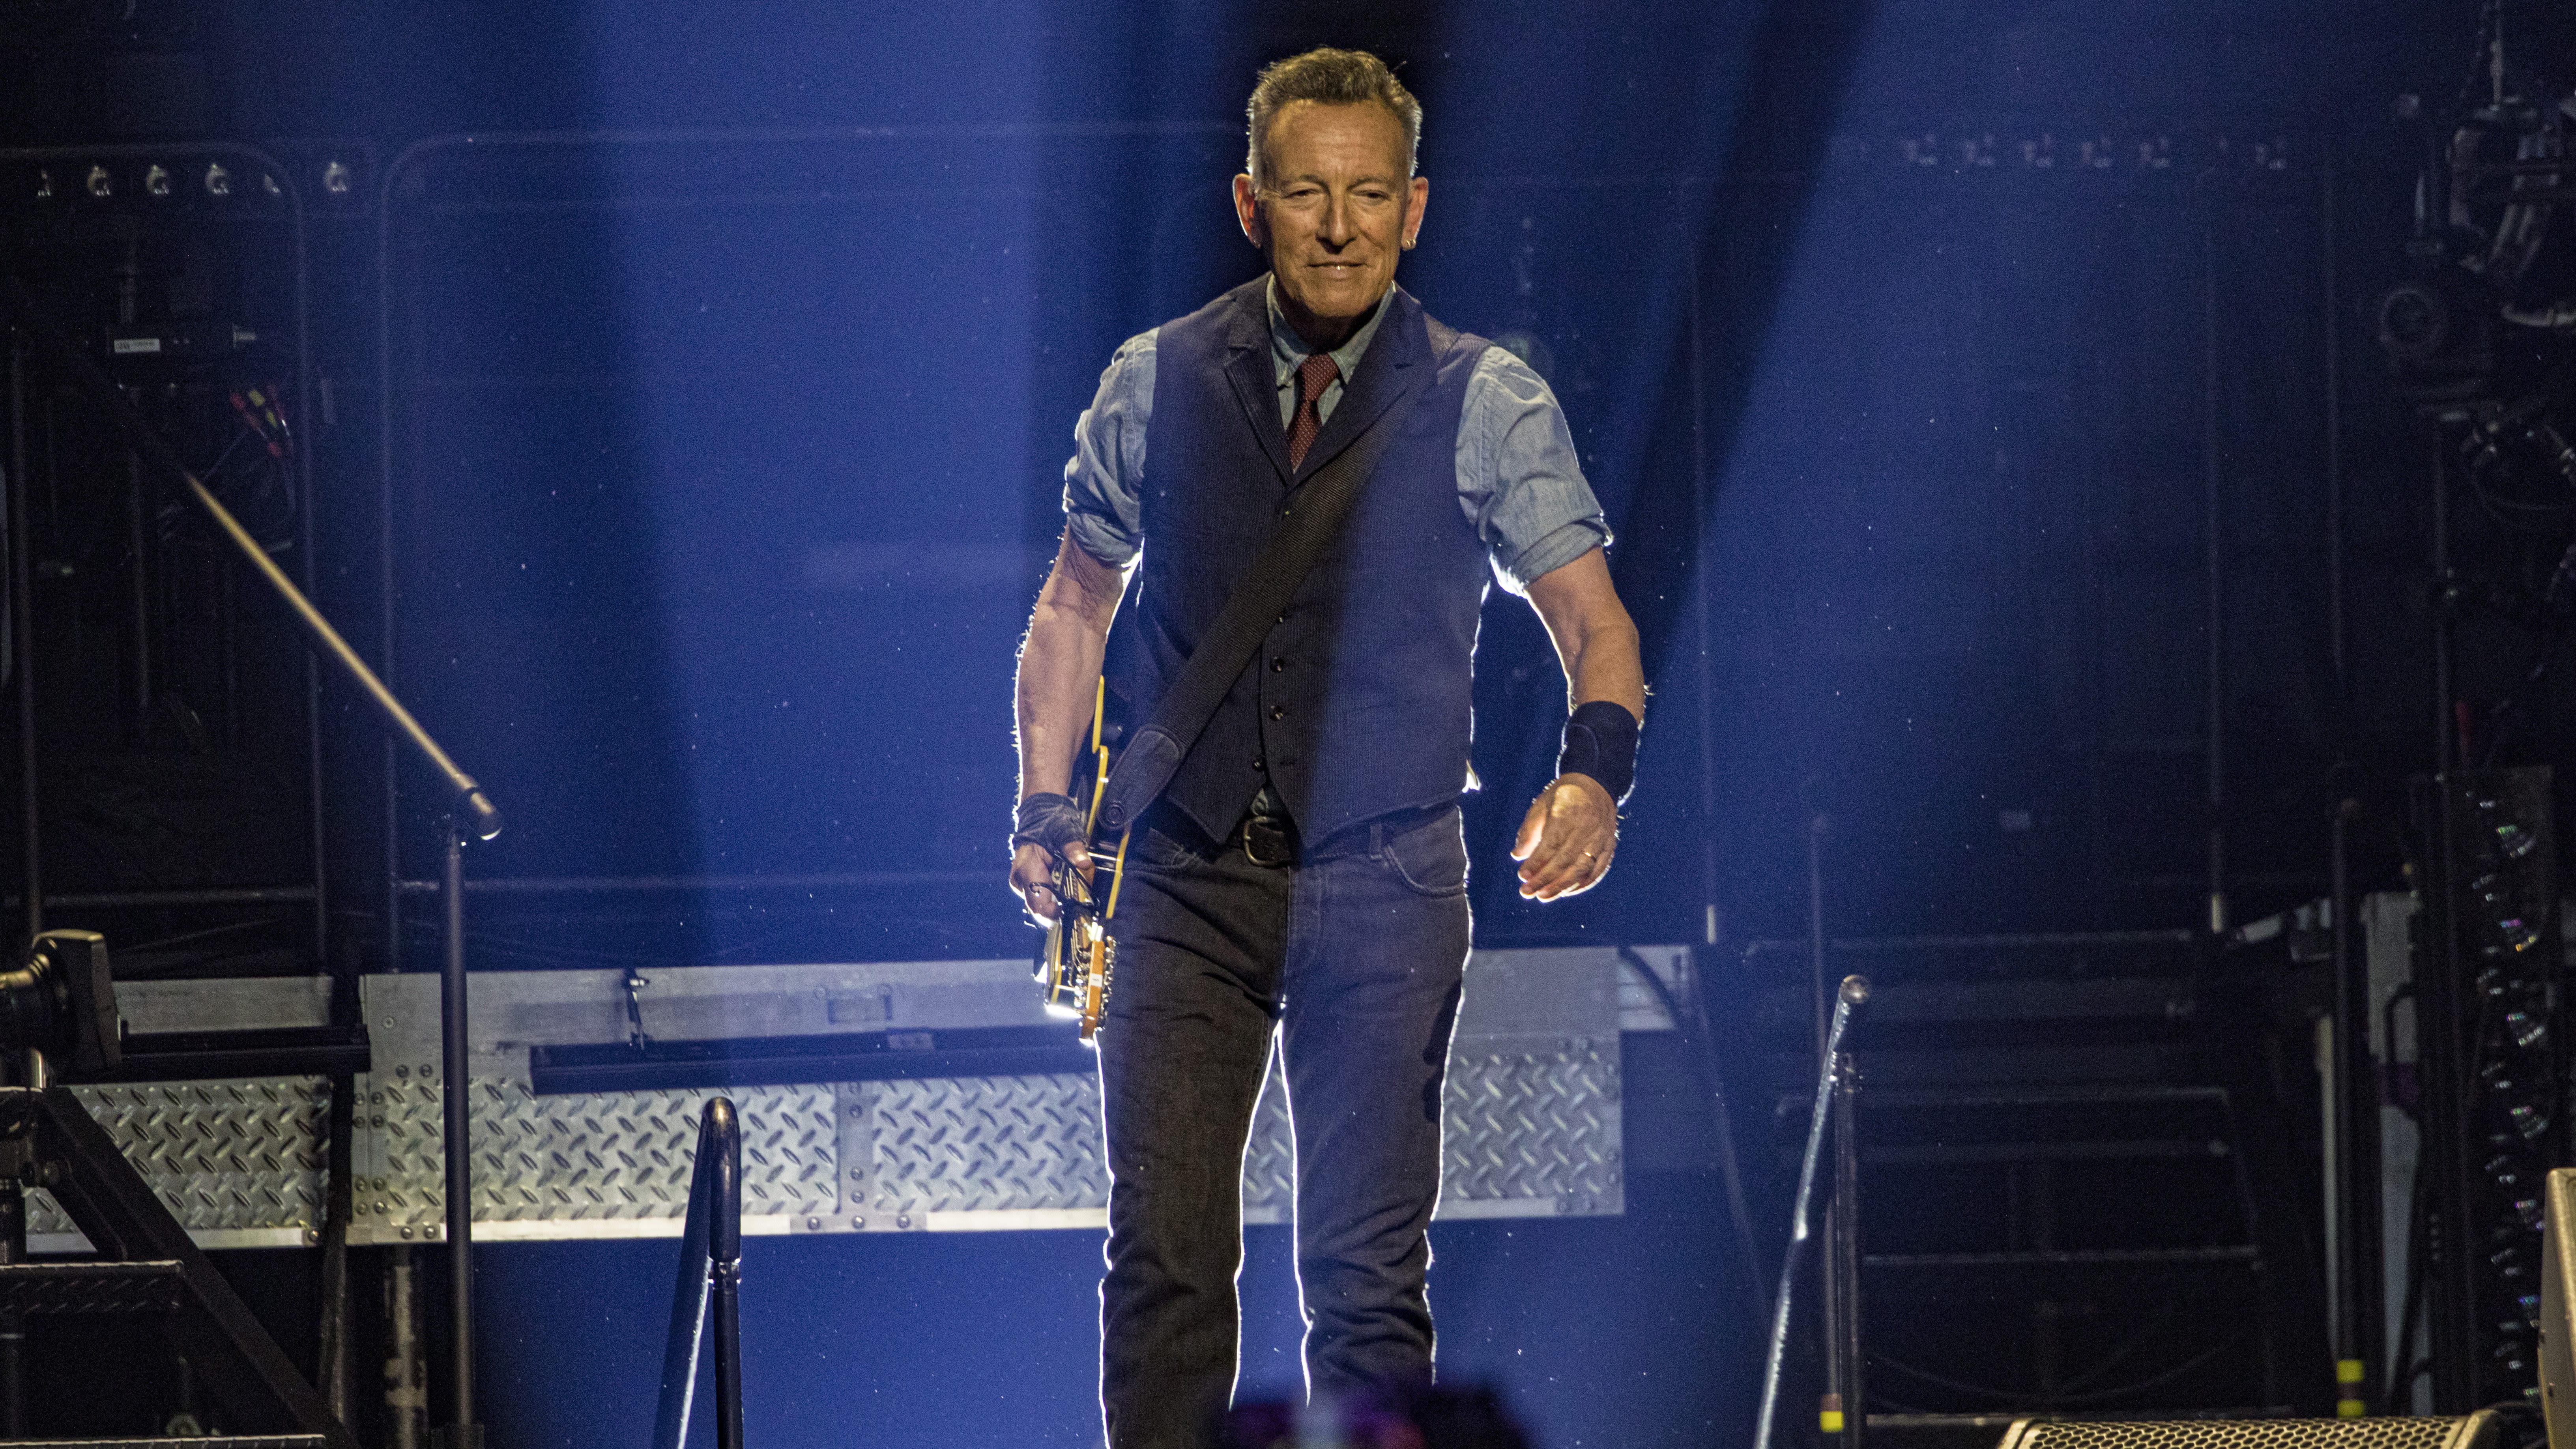 Bruce Springsteen Archives and Center for American Music Honor John Mellencamp, Jackson Browne, Mavis Staples and Dion DiMucci...